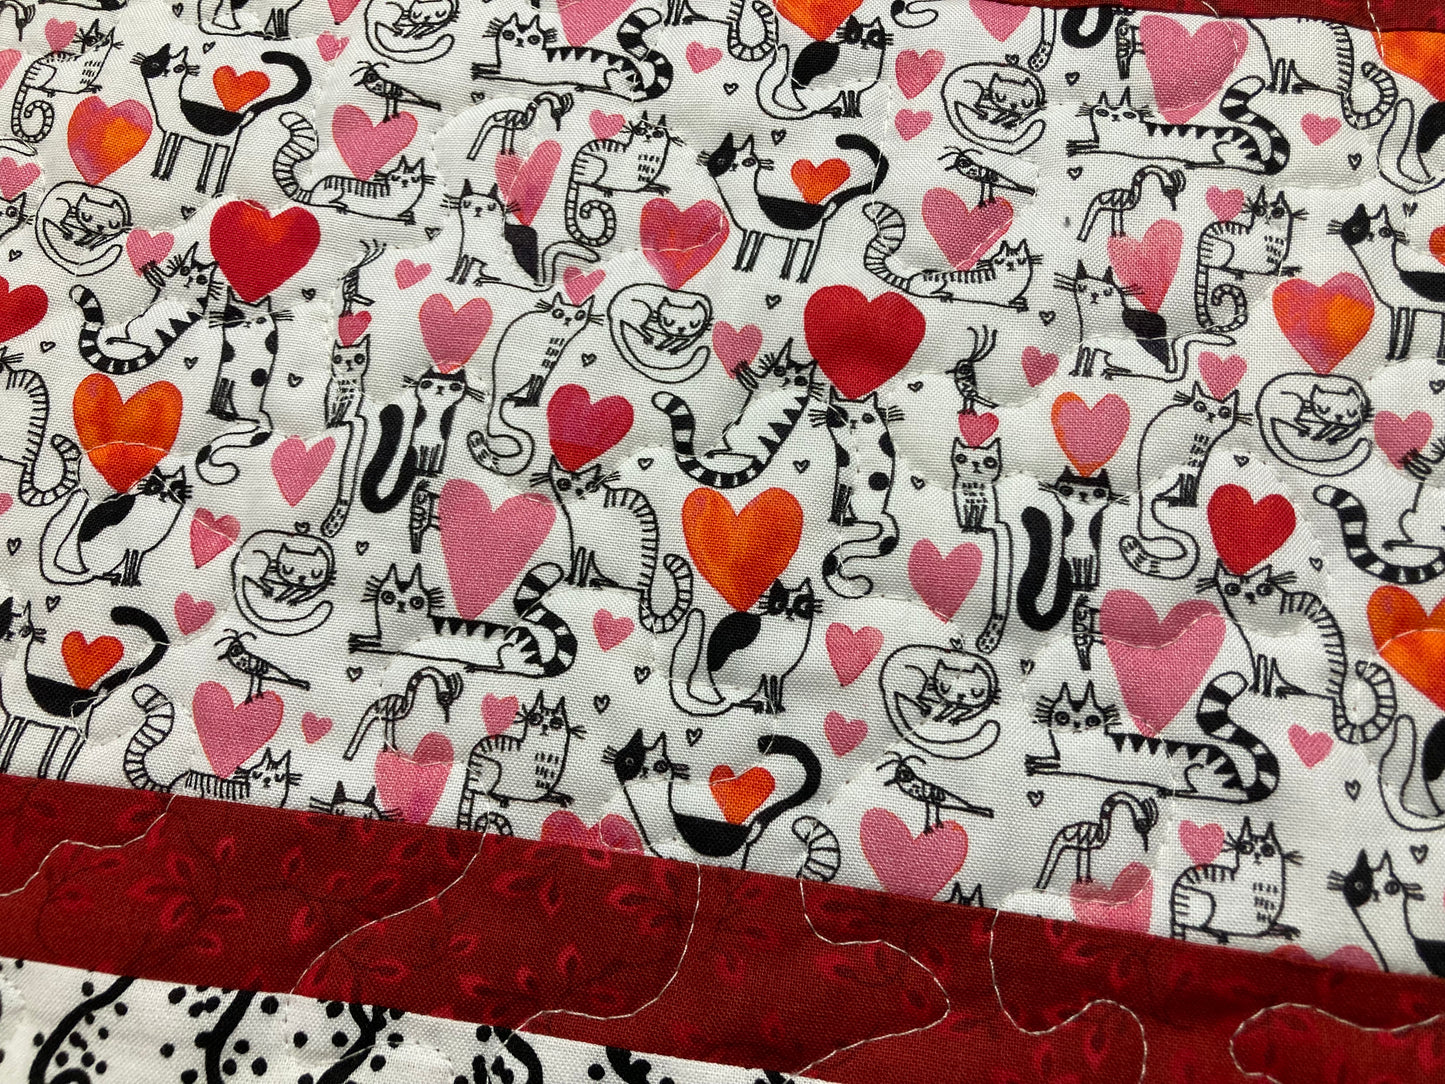 Sassy Cats Fabric Quilted Table Runner, Valentine Hearts 13x36” Cat Lover Feline Whimsical Quirky Fun, Dining Coffee End Table Handmade